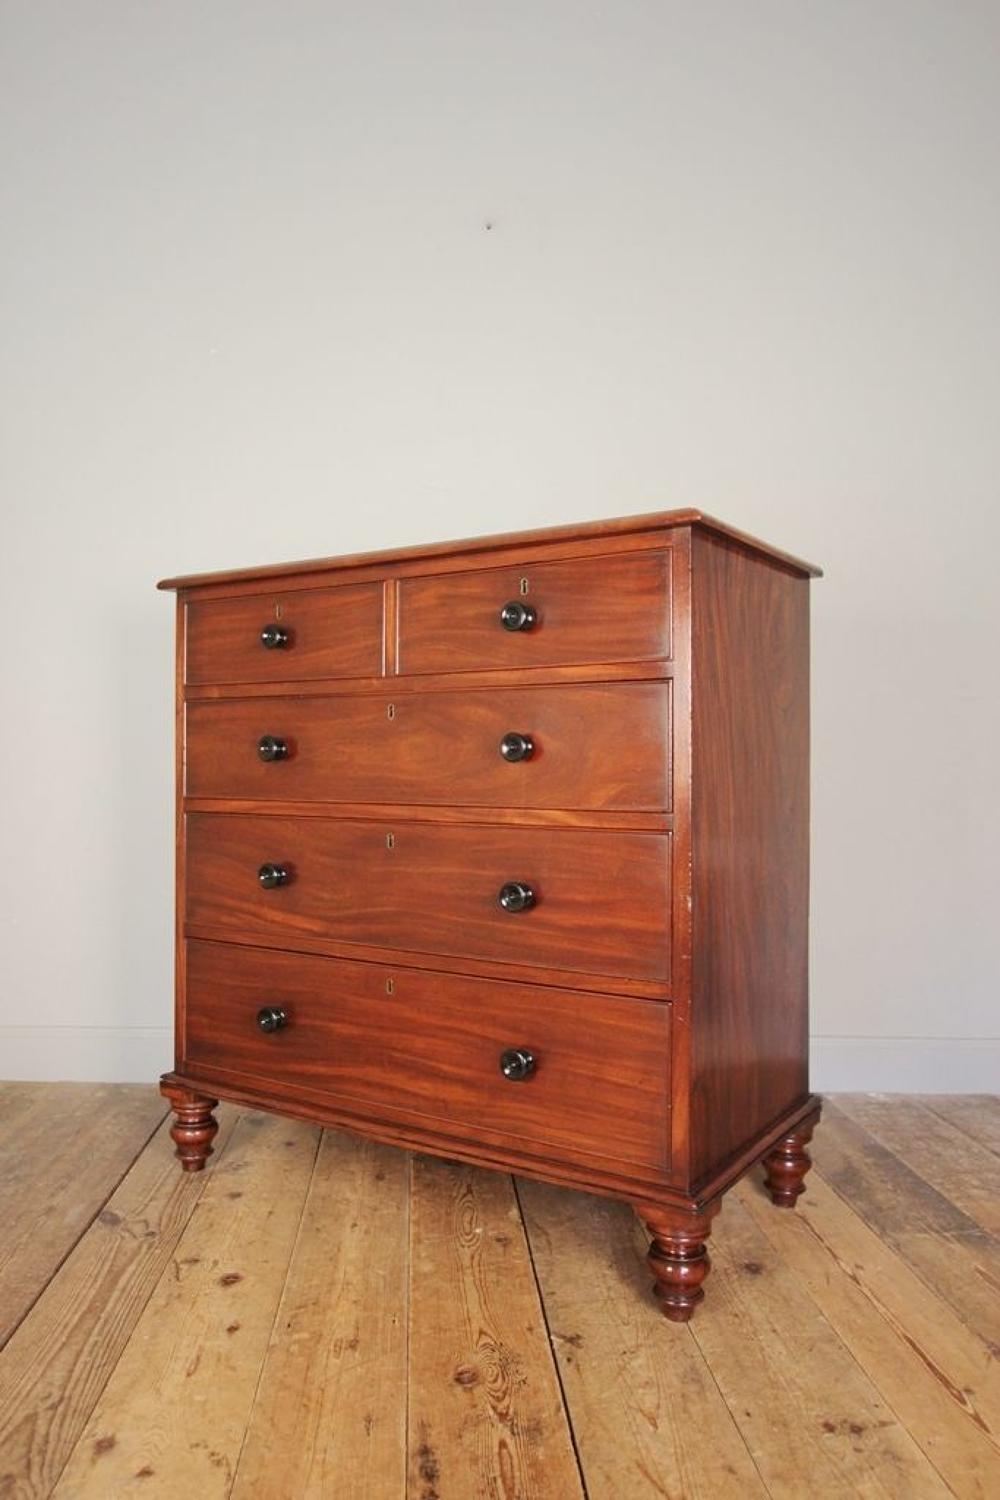 Gillows Mahogany Chest of Drawers